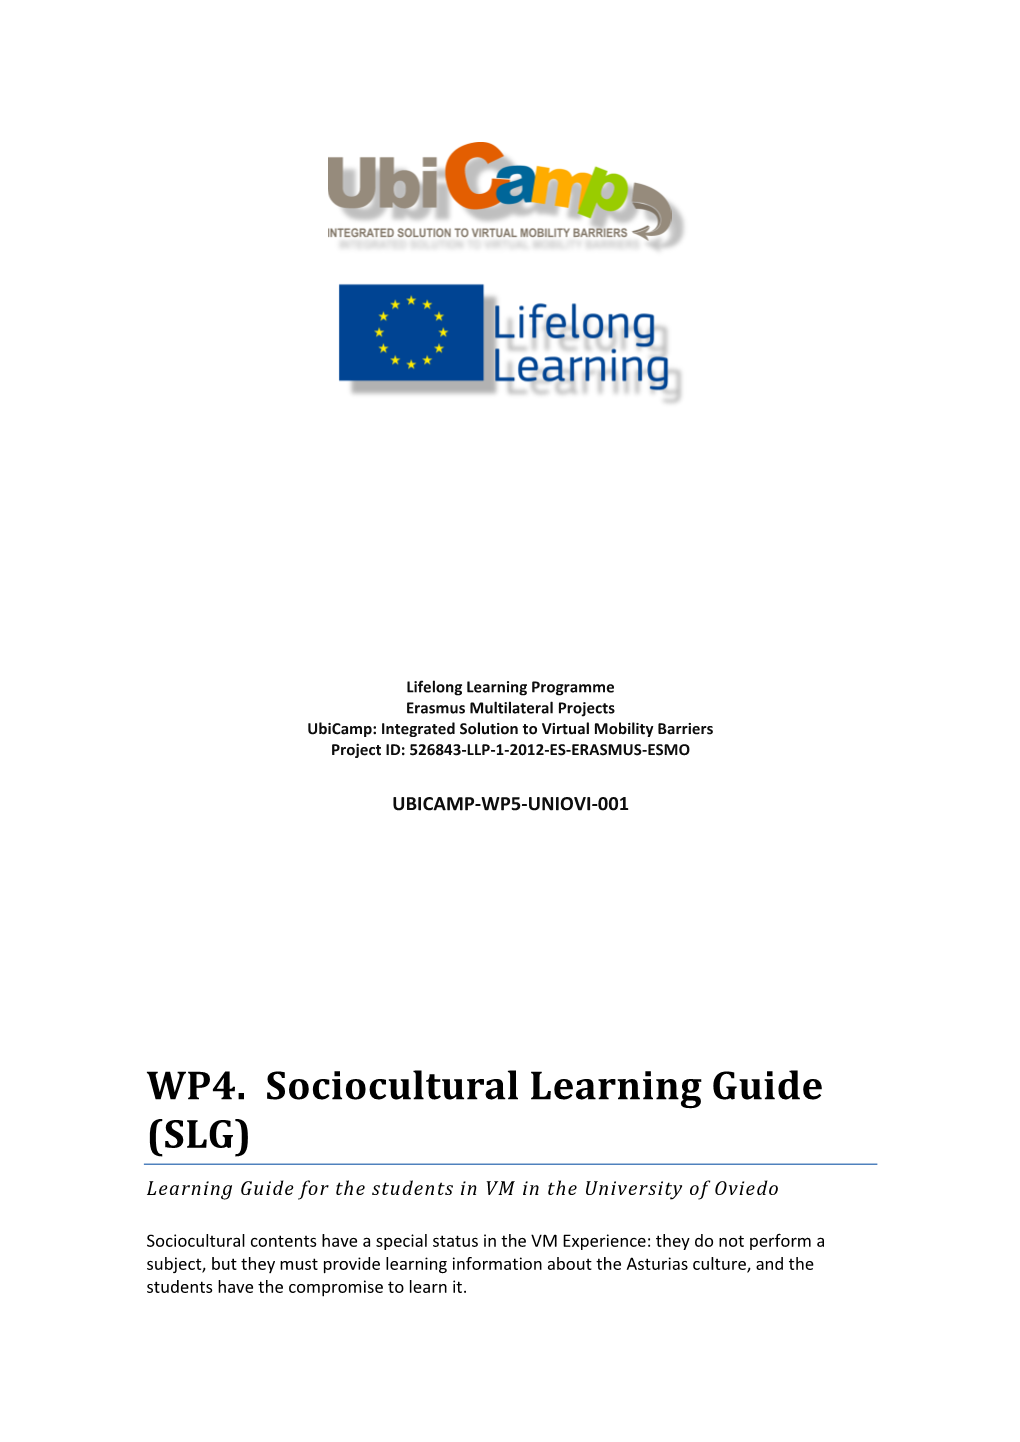 WP4. Sociocultural Learning Guide (SLG) Learning Guide for the Students in VM in the University of Oviedo